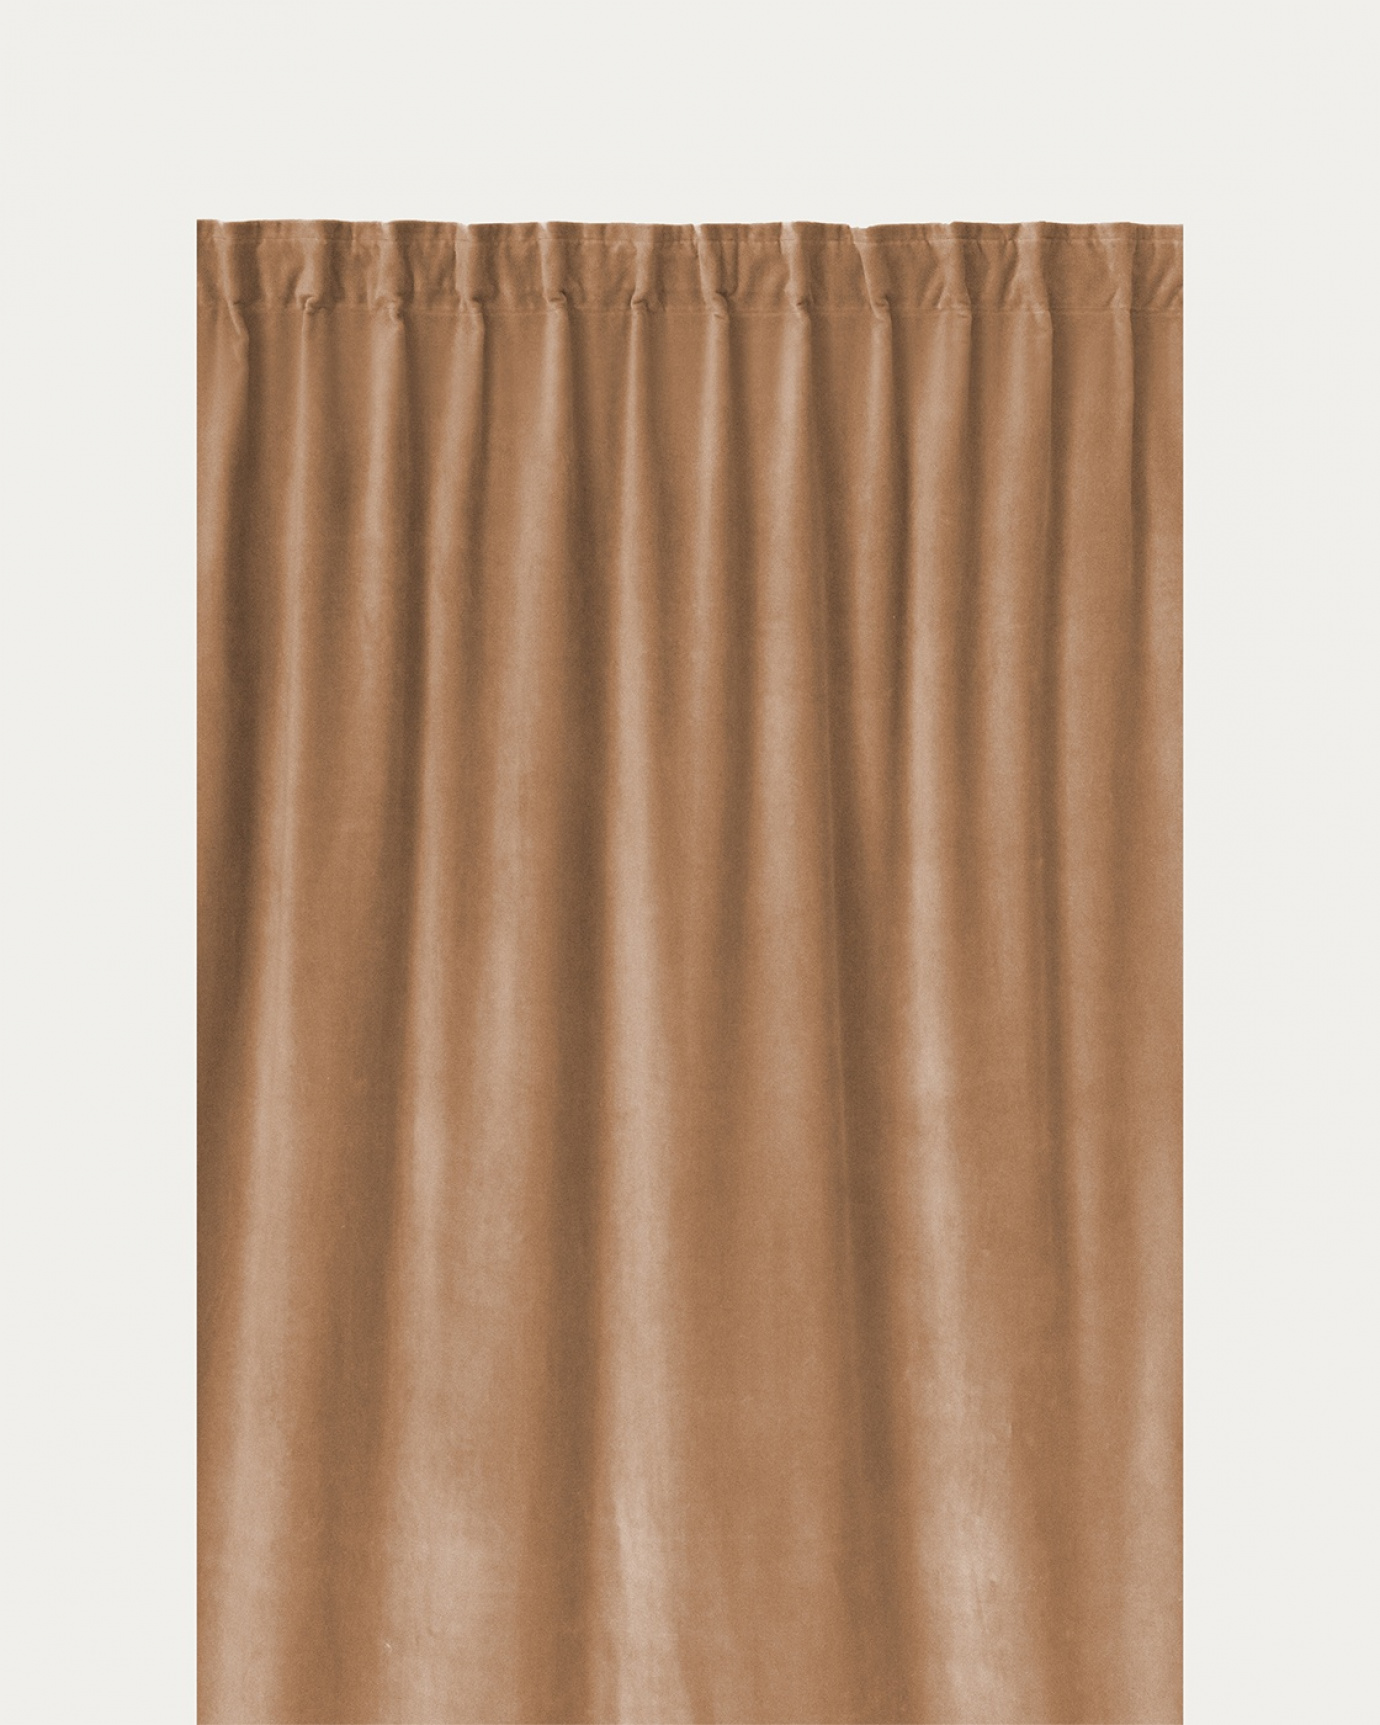 Product image camel brown PAOLO curtain made of cotton velvet with finished pleat tape from LINUM DESIGN. Size 135x290 cm and sold in 2-pack.